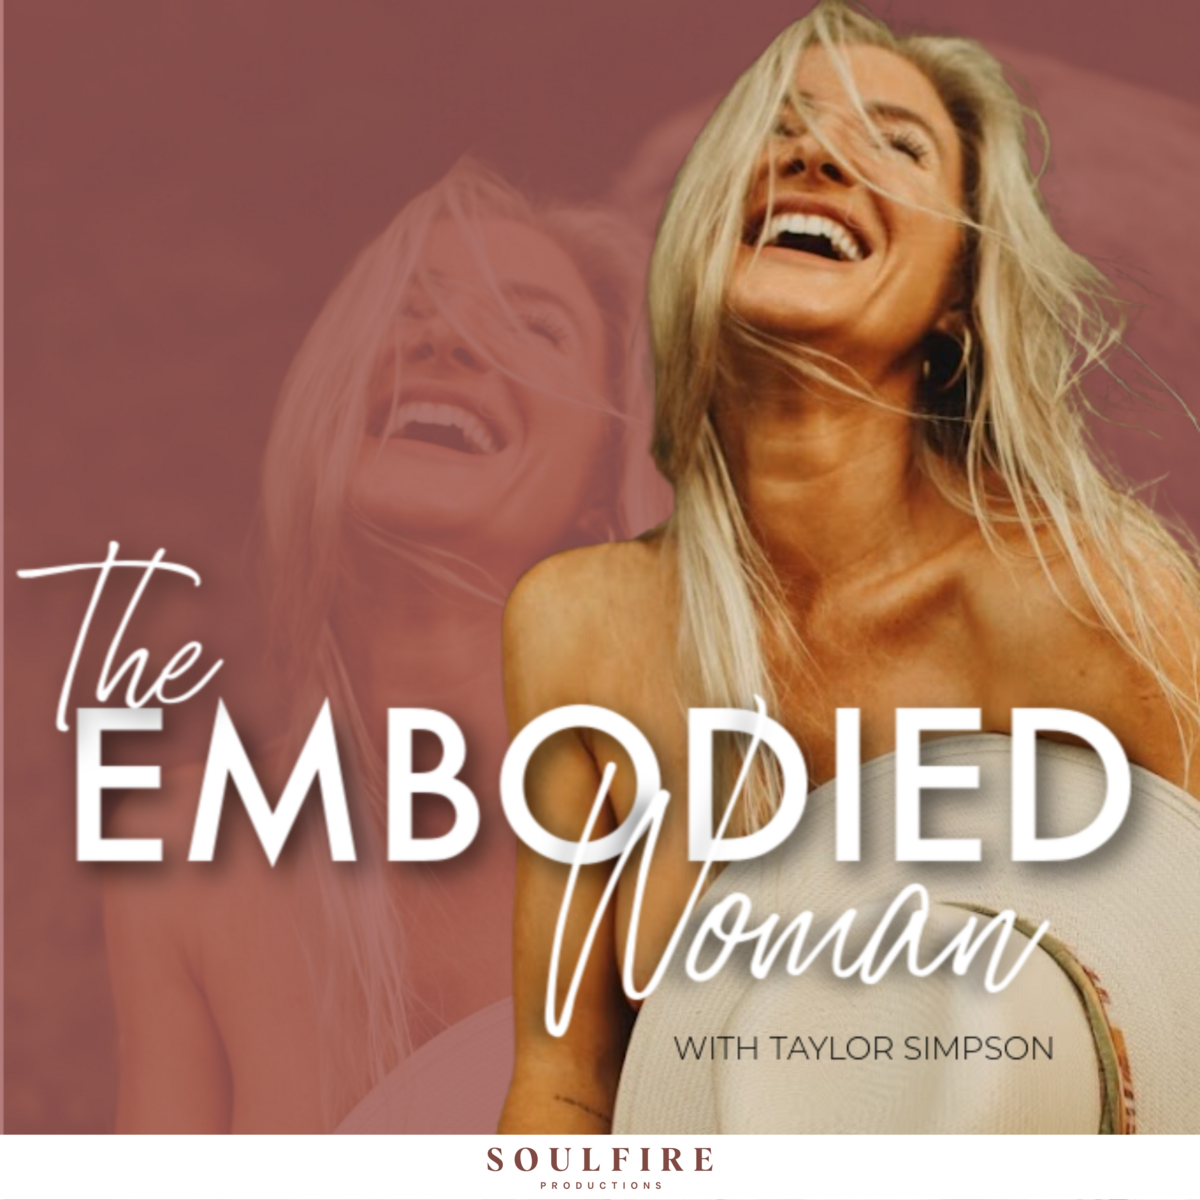 The Embodied Woman